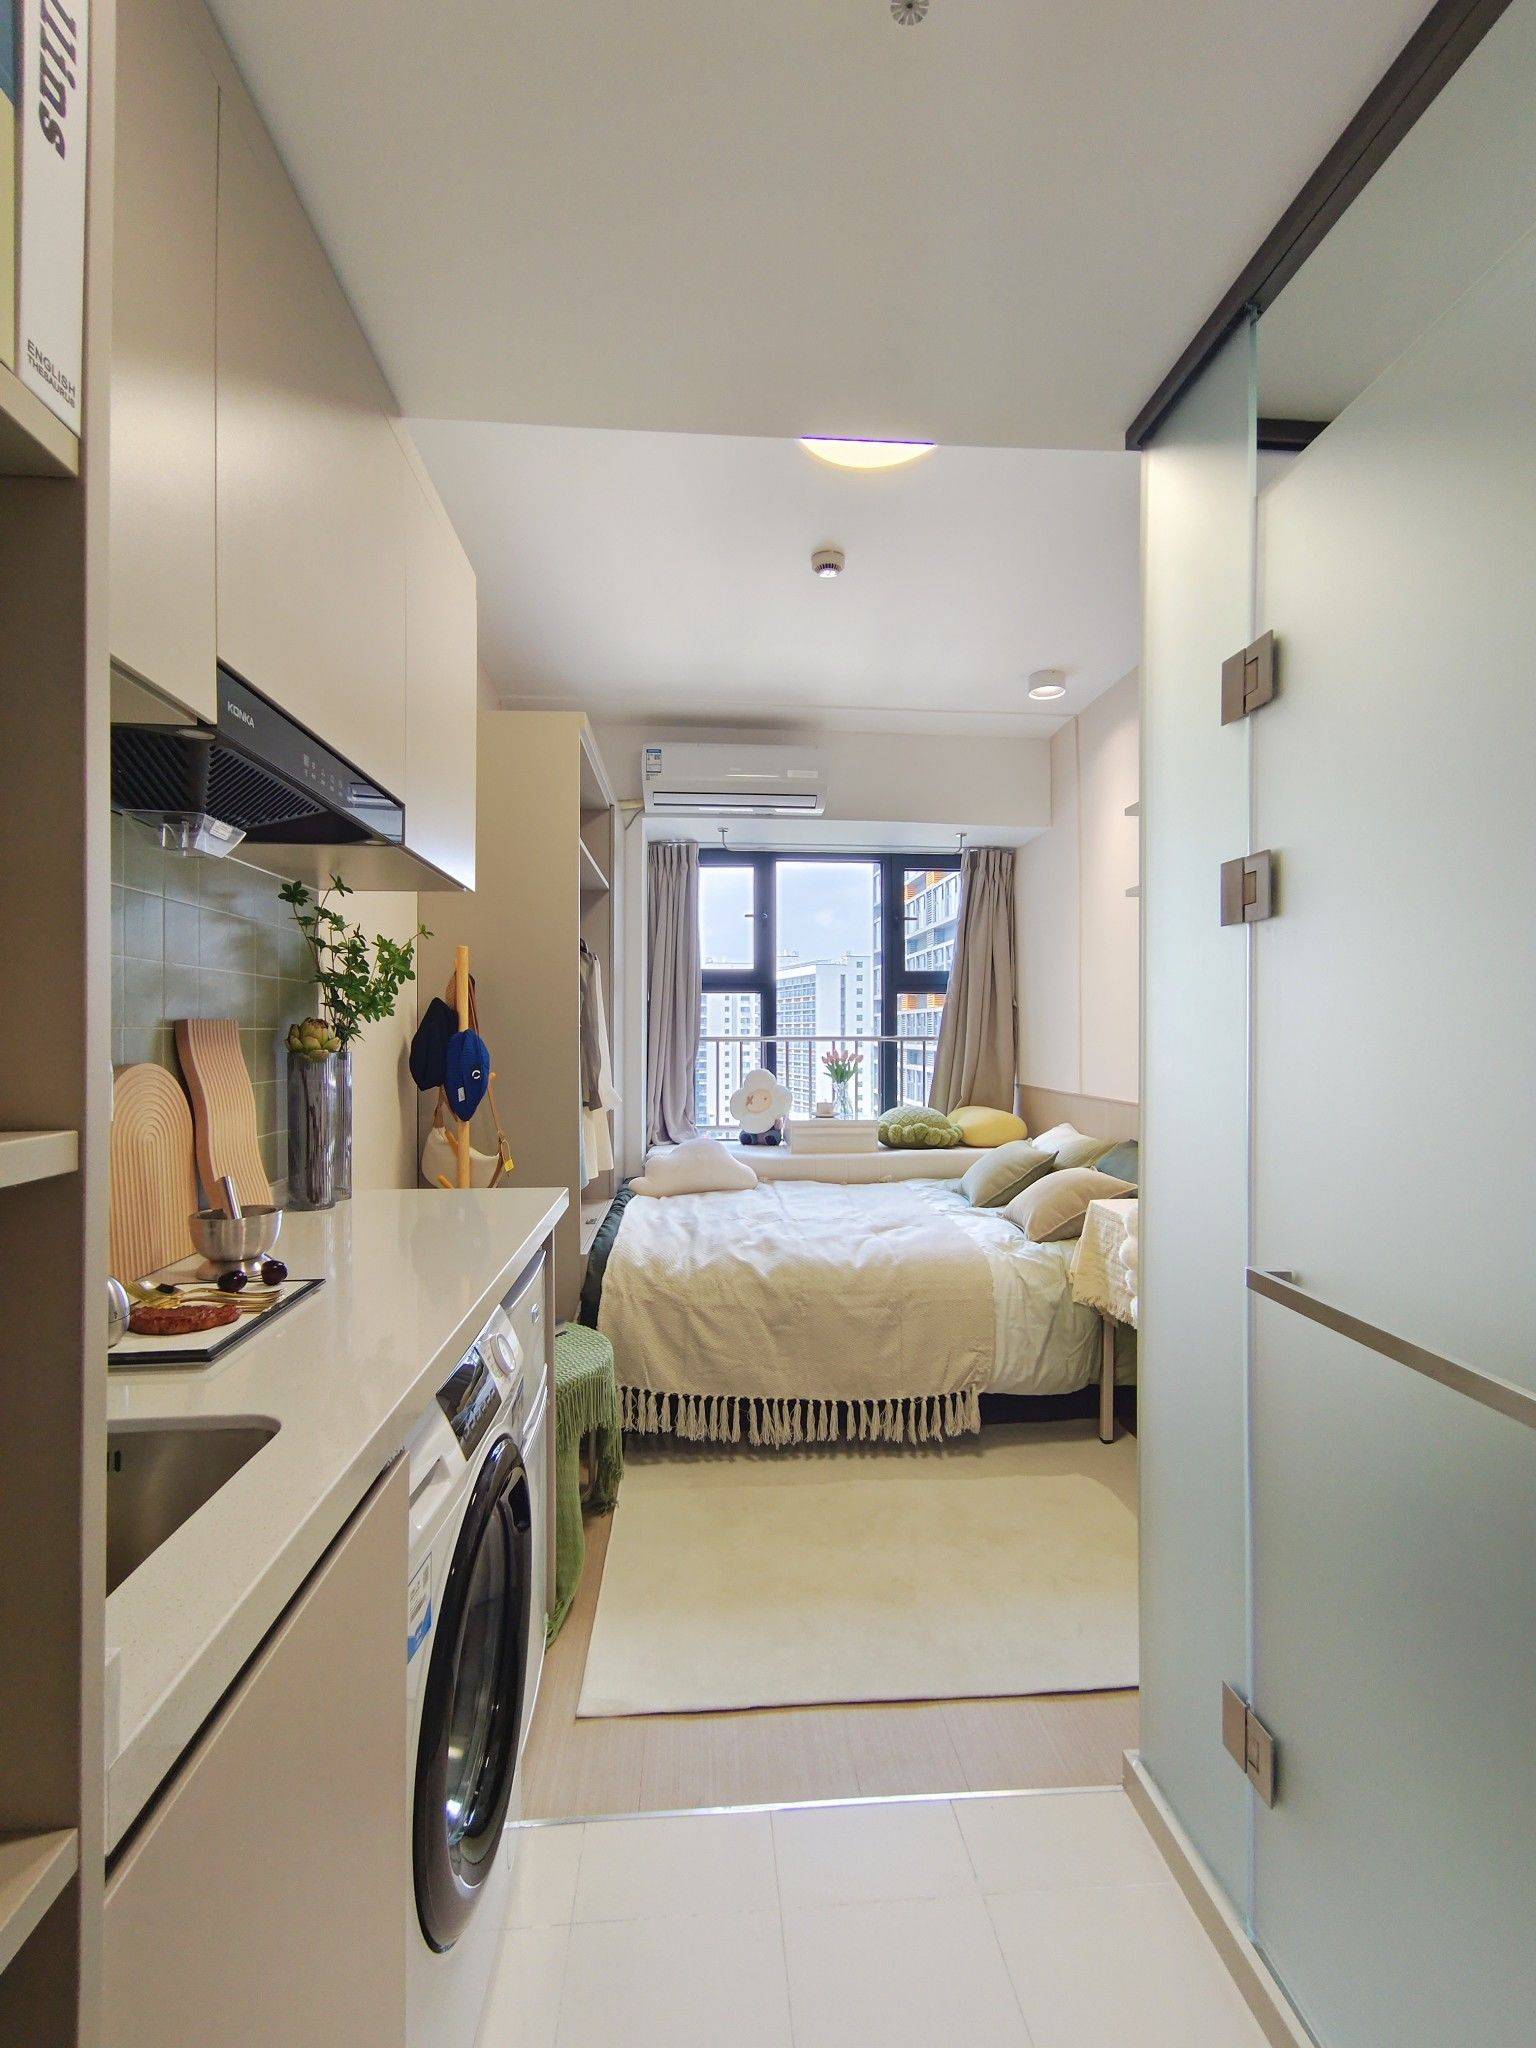 Shanghai-Minhang-Cozy Home,Clean&Comfy,No Gender Limit,Chilled,Pet Friendly